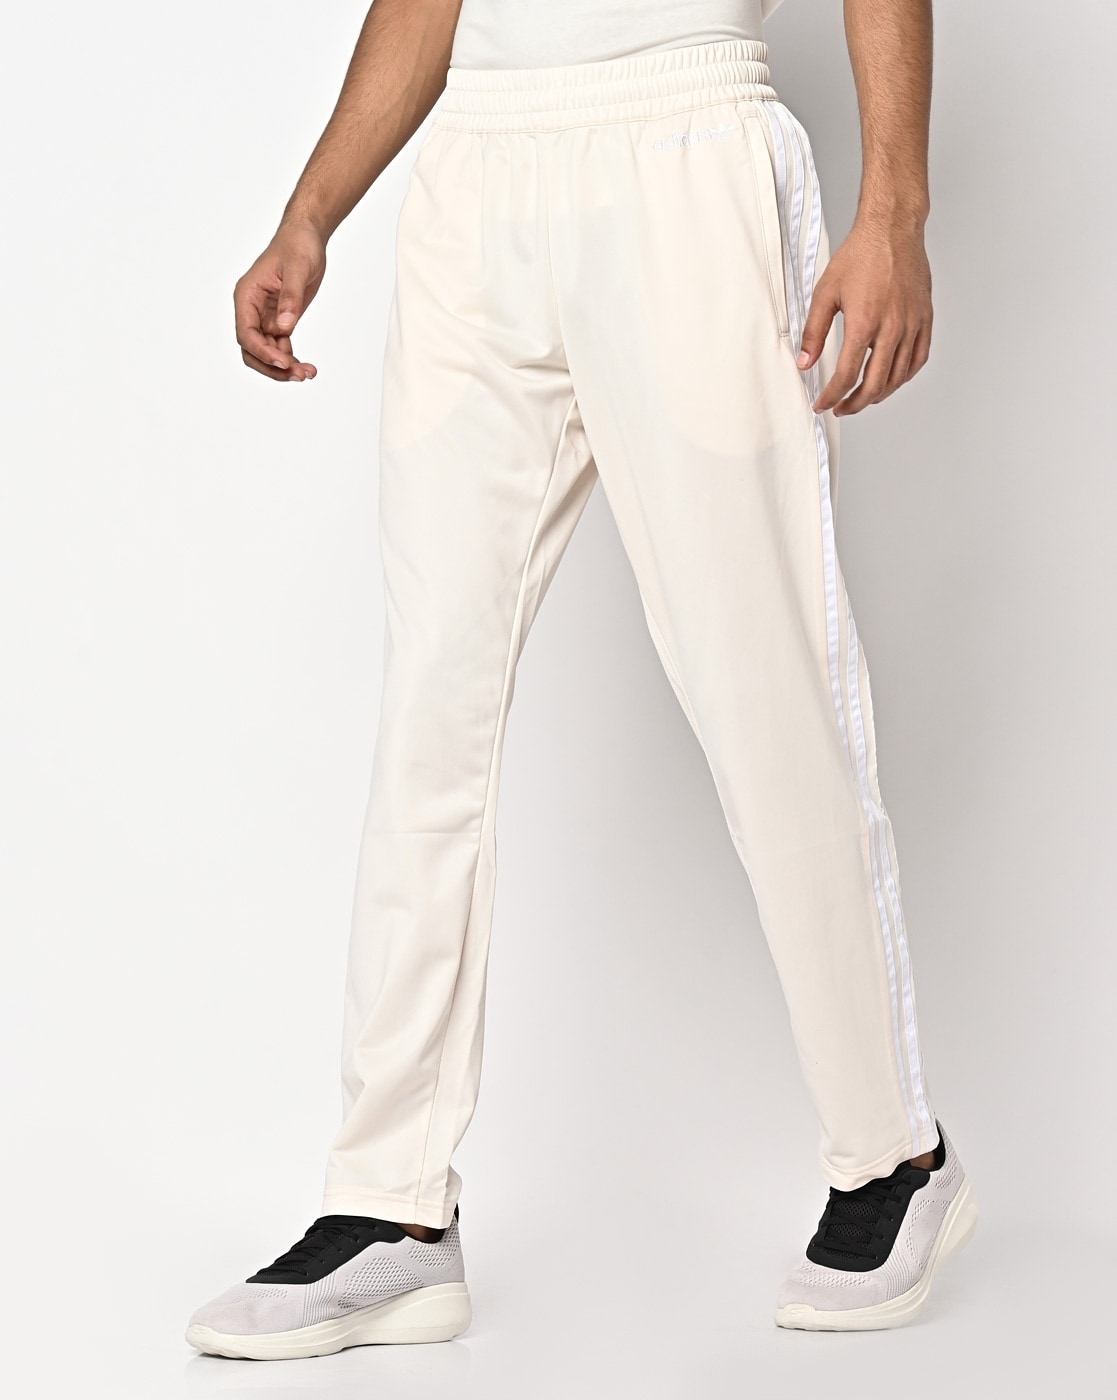 Mens Pants 90% White Duck Down Padded Thicken Winter Warm Down Pants Men  Joggers Sportswear Sweatpants Thermal Down Trousers J231222 From  Carol_store, $32.93 | DHgate.Com